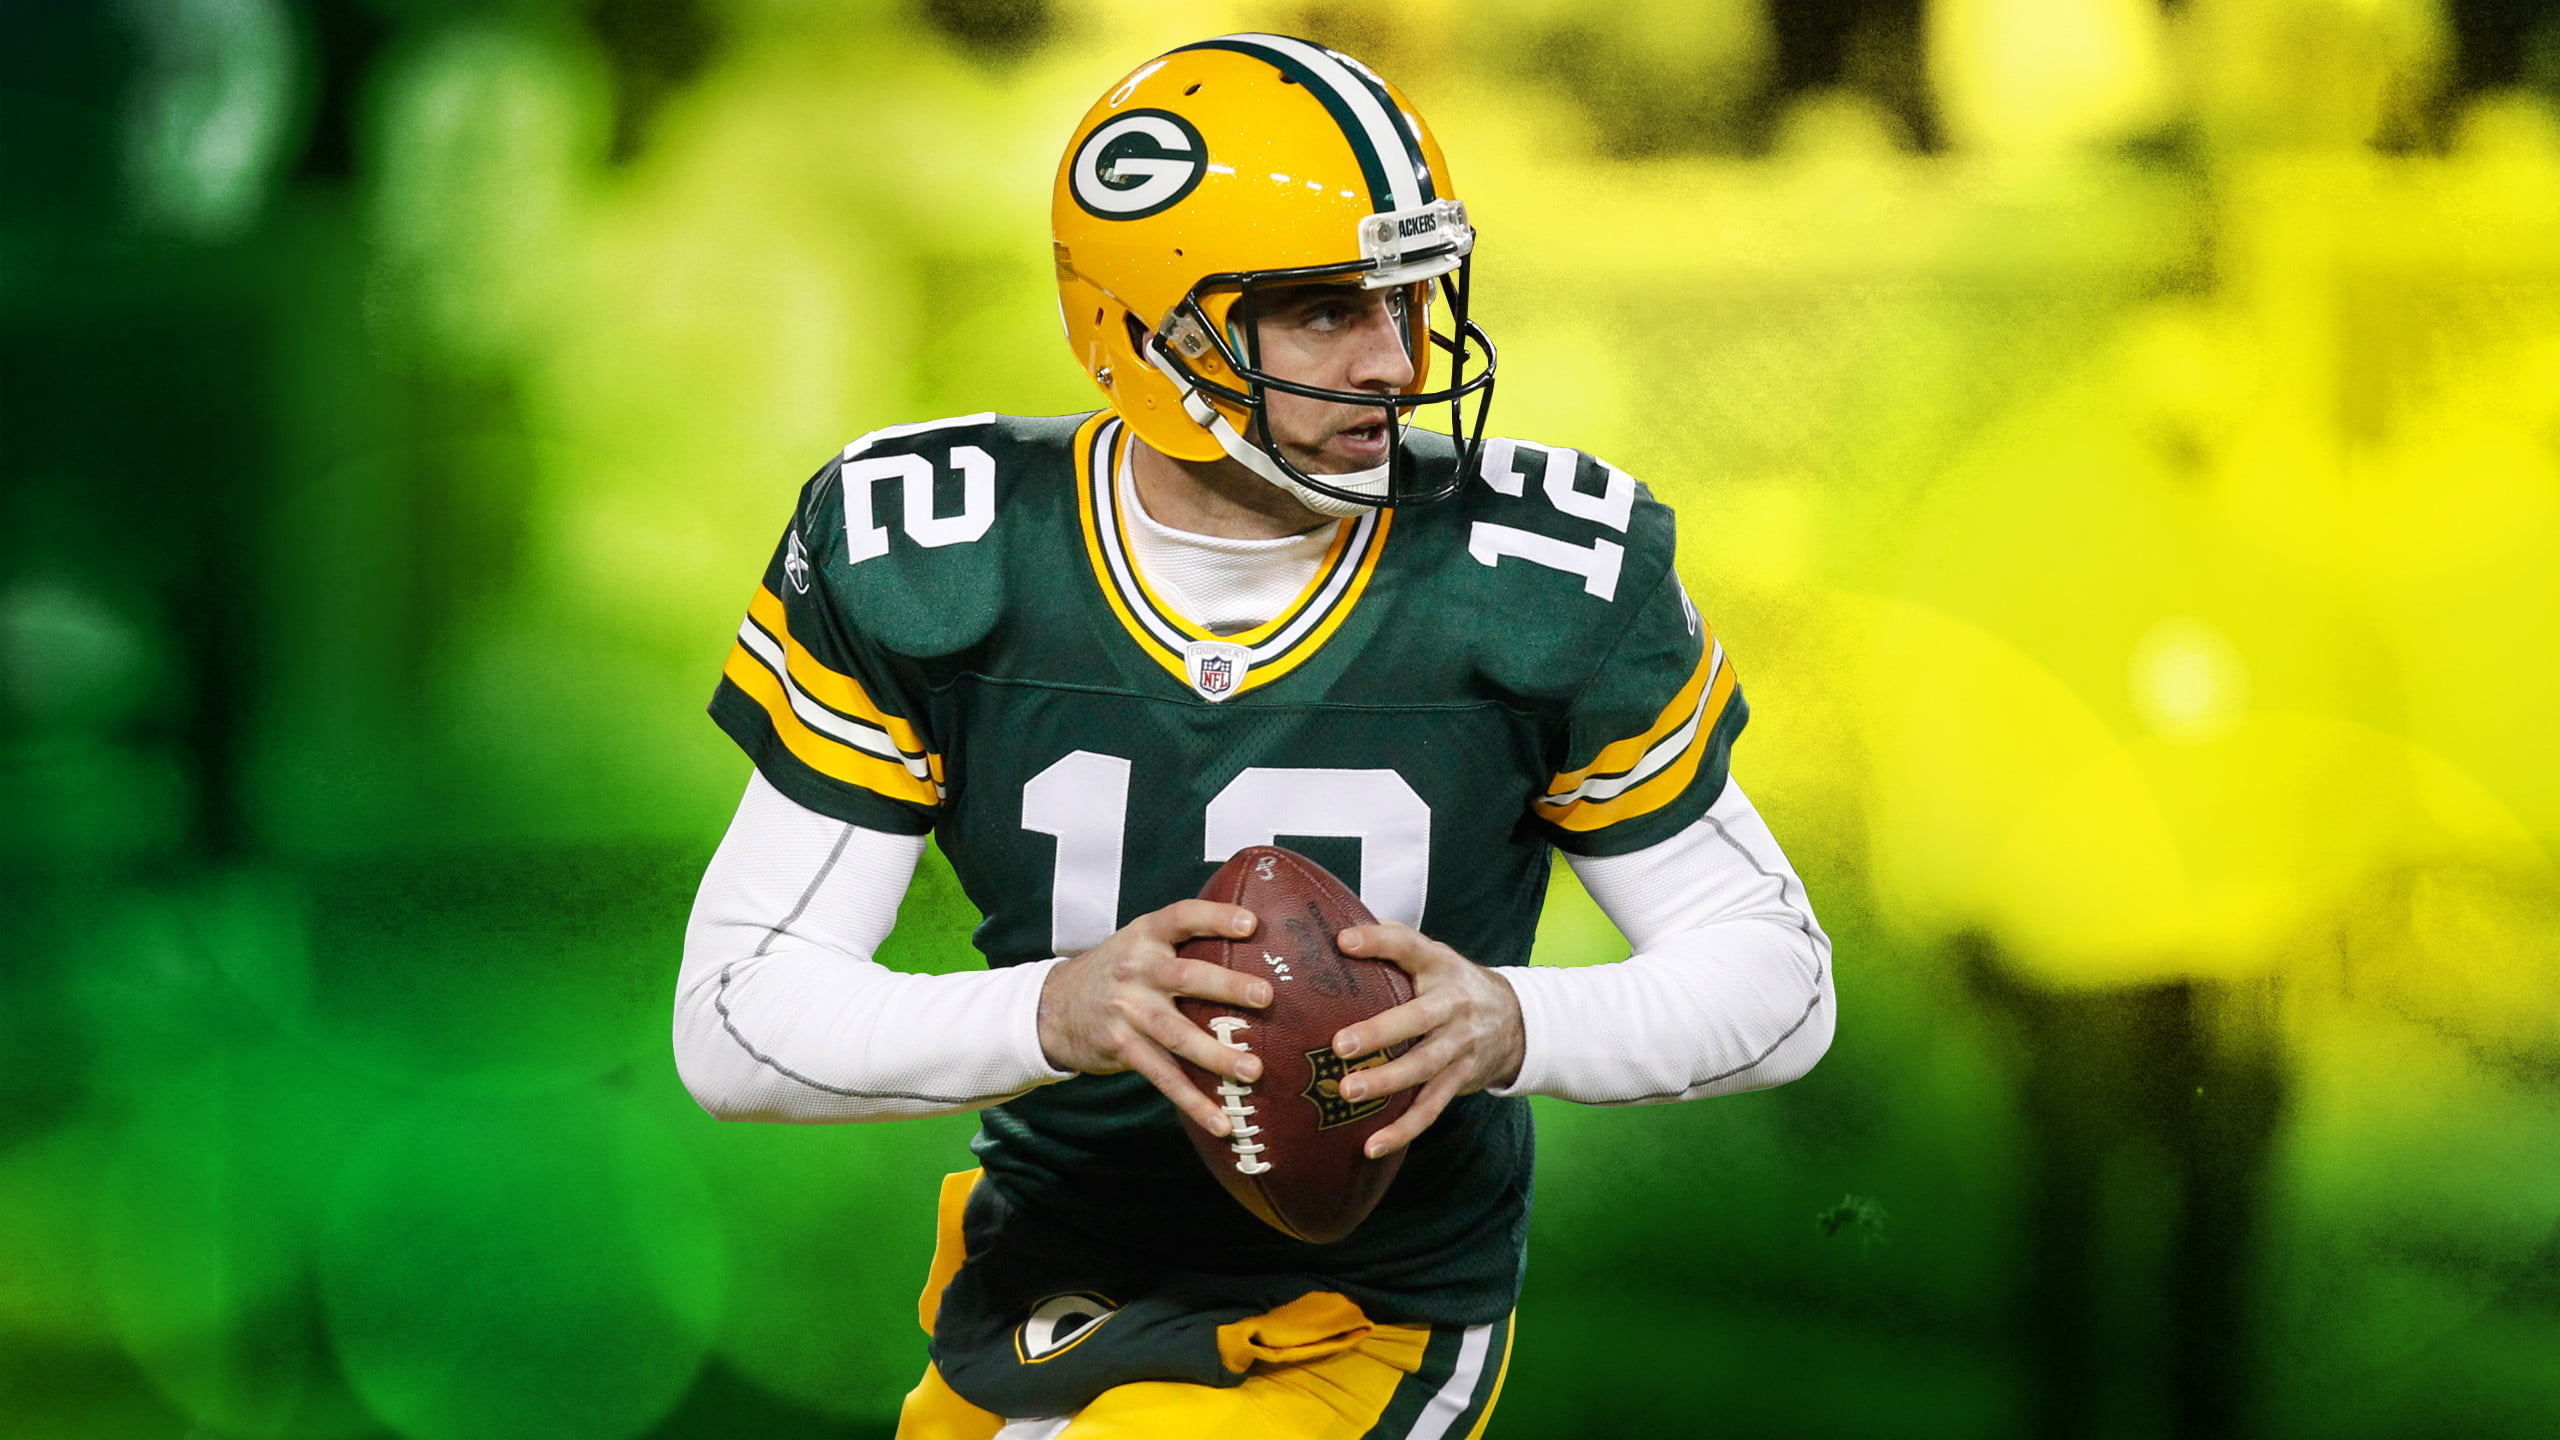 Green Bay Packers: Aaron Rodgers, league MVP for the 2011, 2014, 2020 and 2021 NFL seasons. 2560x1440 HD Background.